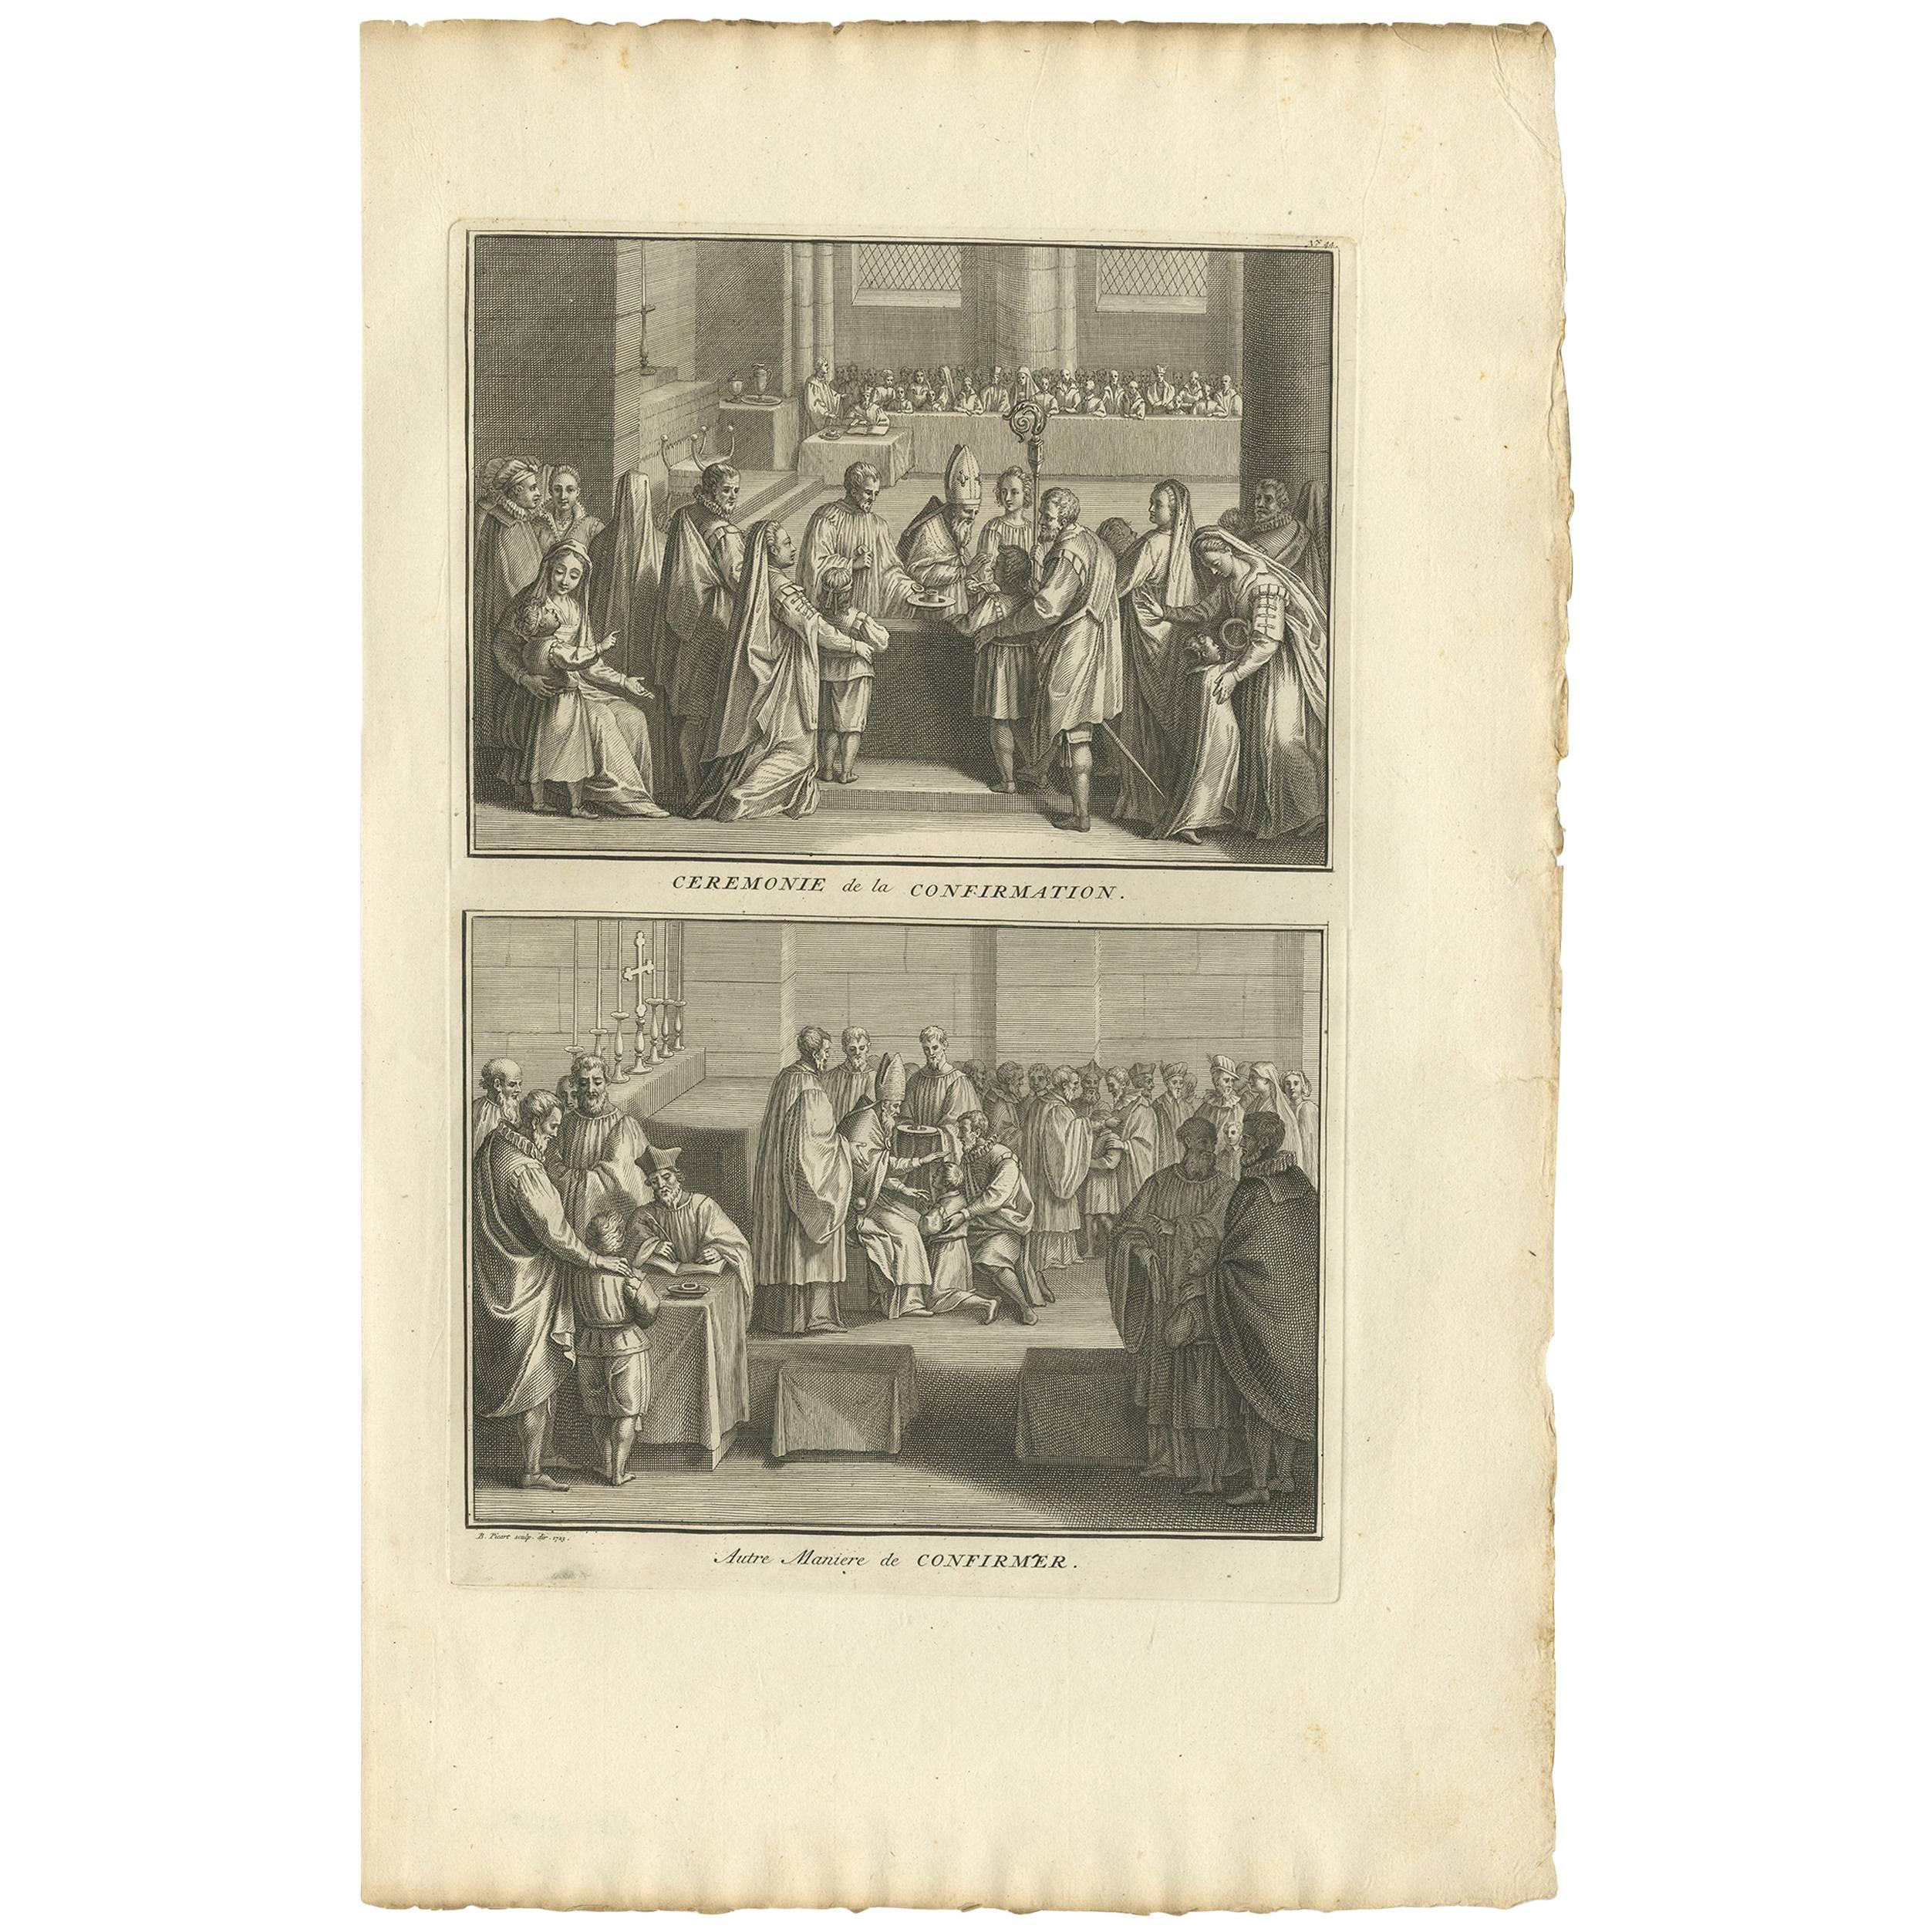 Antique Print Illustrating the Ceremony of Confirmation by B. Picart, 1723